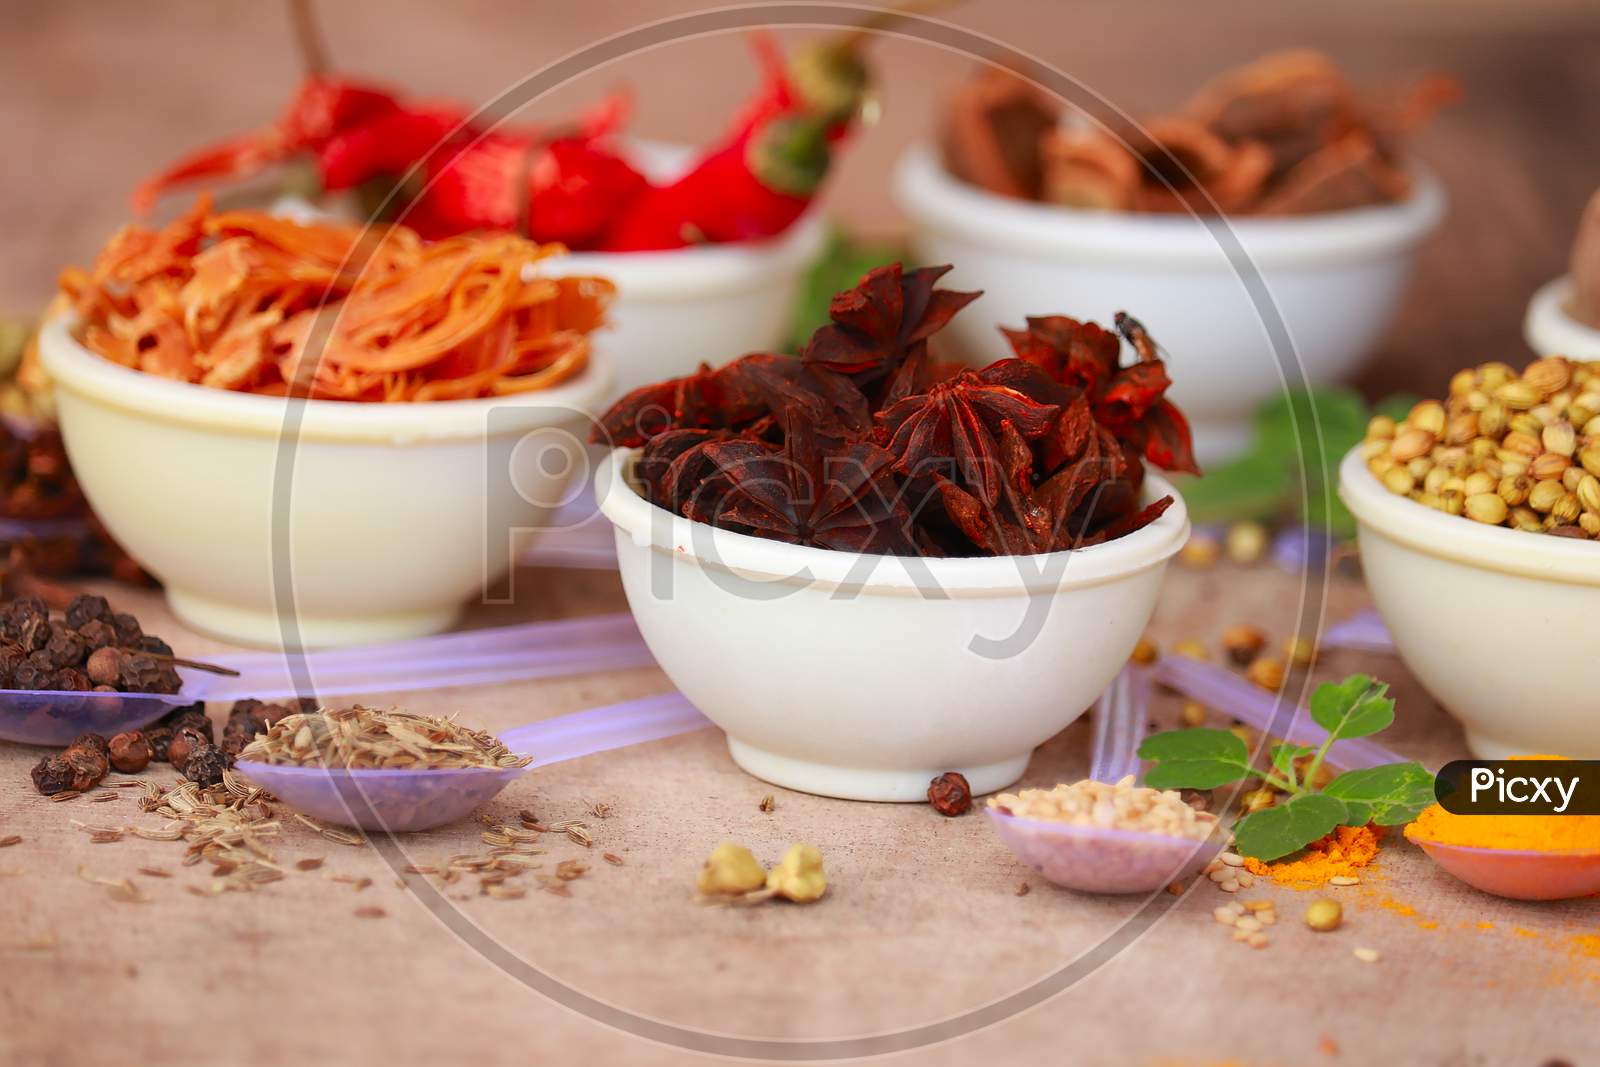 Spices And Herbs In White Bowls,Indian Exotic Gourmet Food Ingredients: Incl Turmeric,Spice For The Indian Curry,Garam Masala,Tandoori Masala,